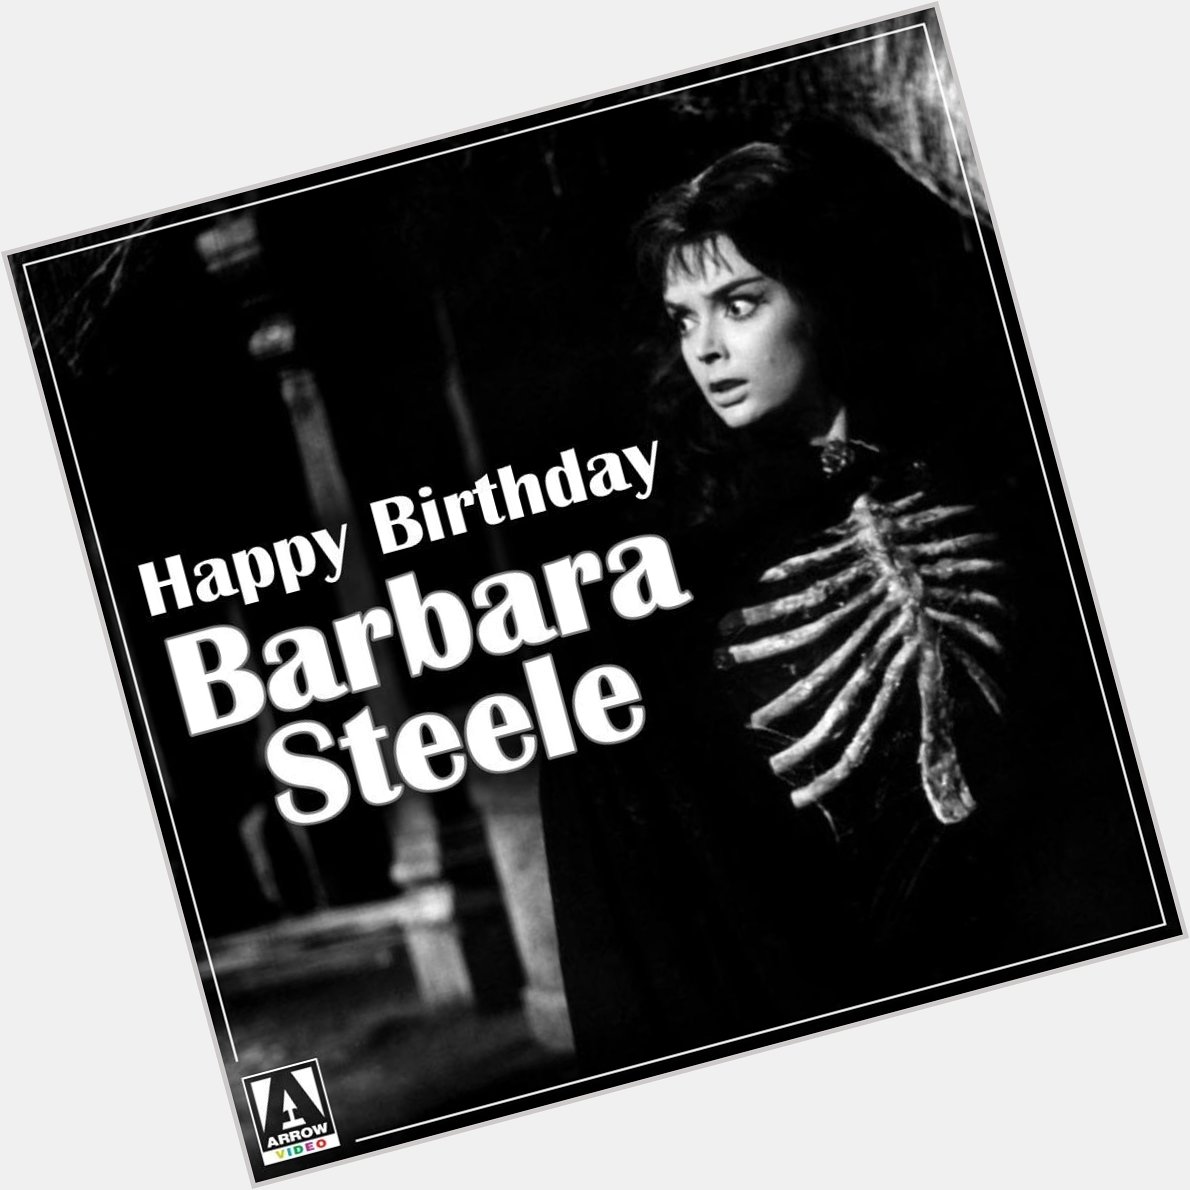 Happy birthday, Barbara Steele, the gothic world personified. 